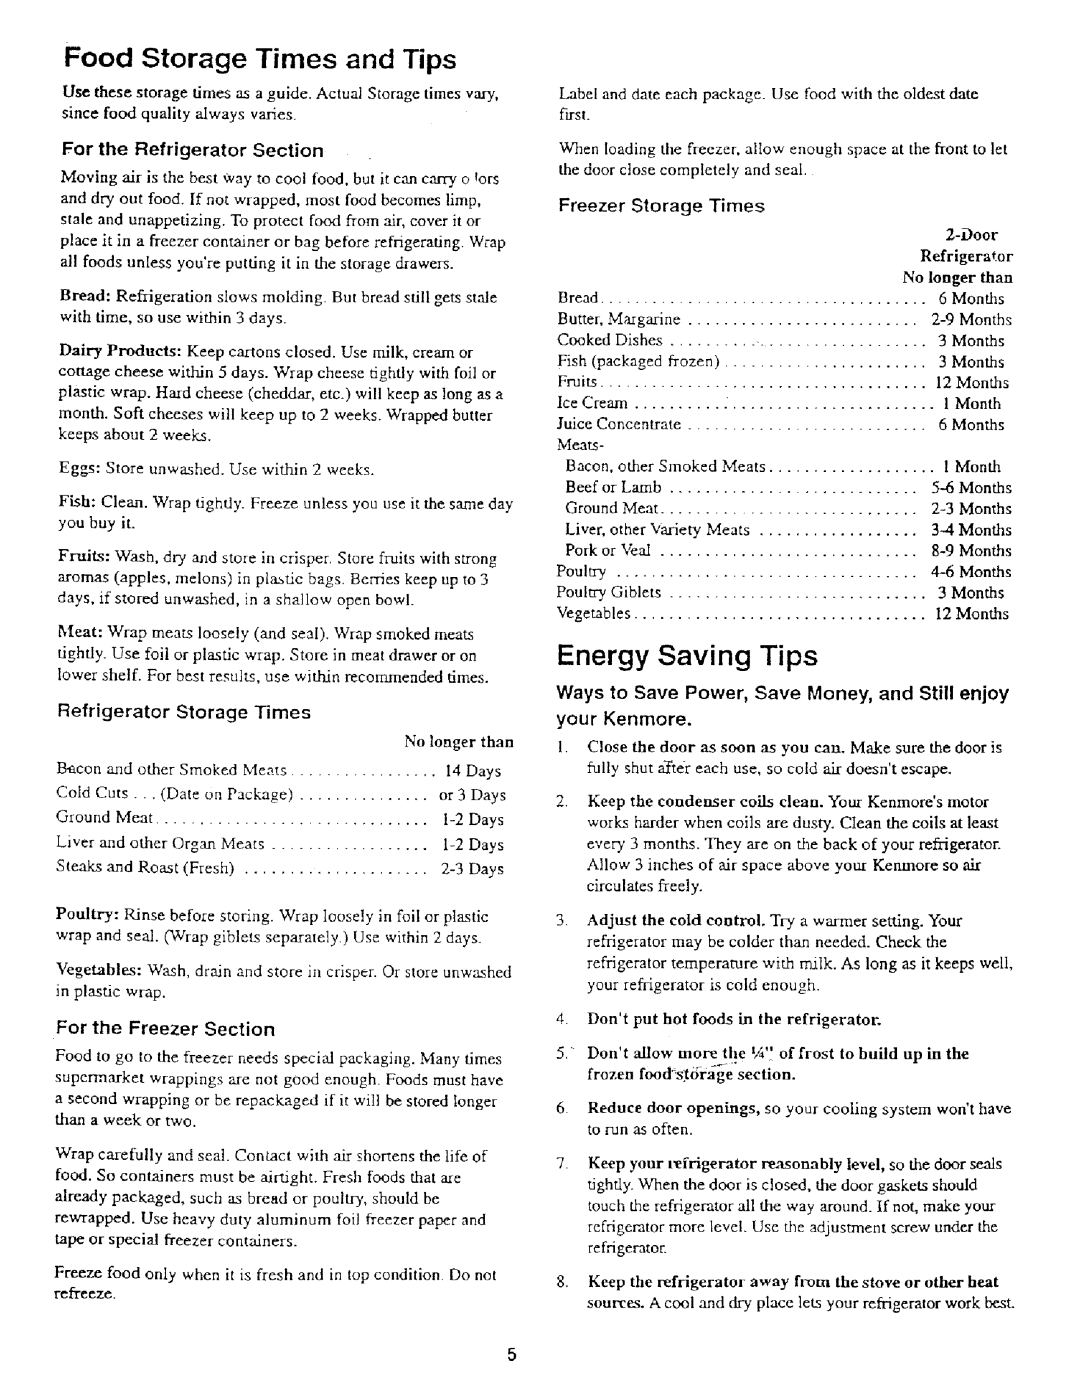 Kenmore 62042 owner manual Food Storage Times and Tips, Energy Saving Tips 